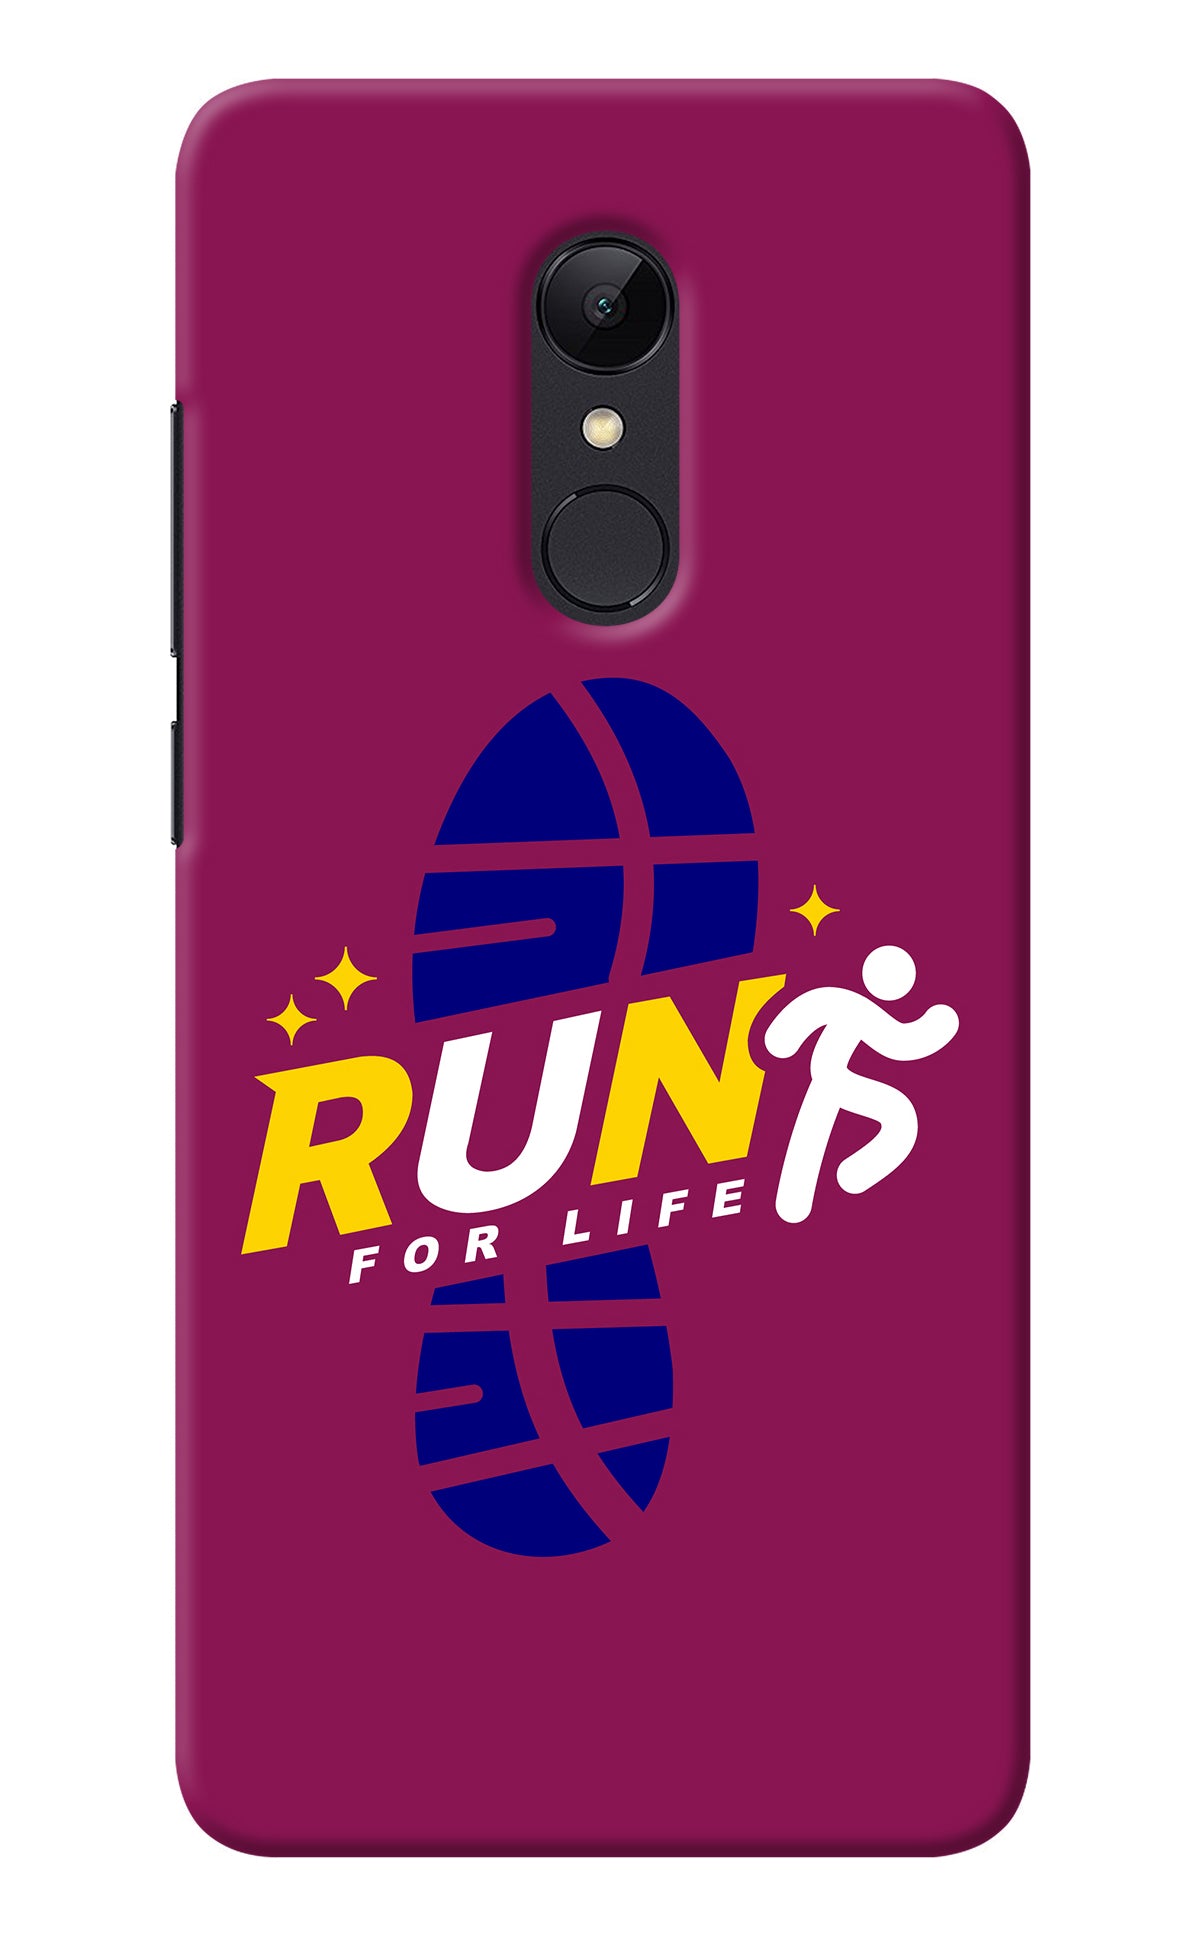 Run for Life Redmi Note 4 Back Cover